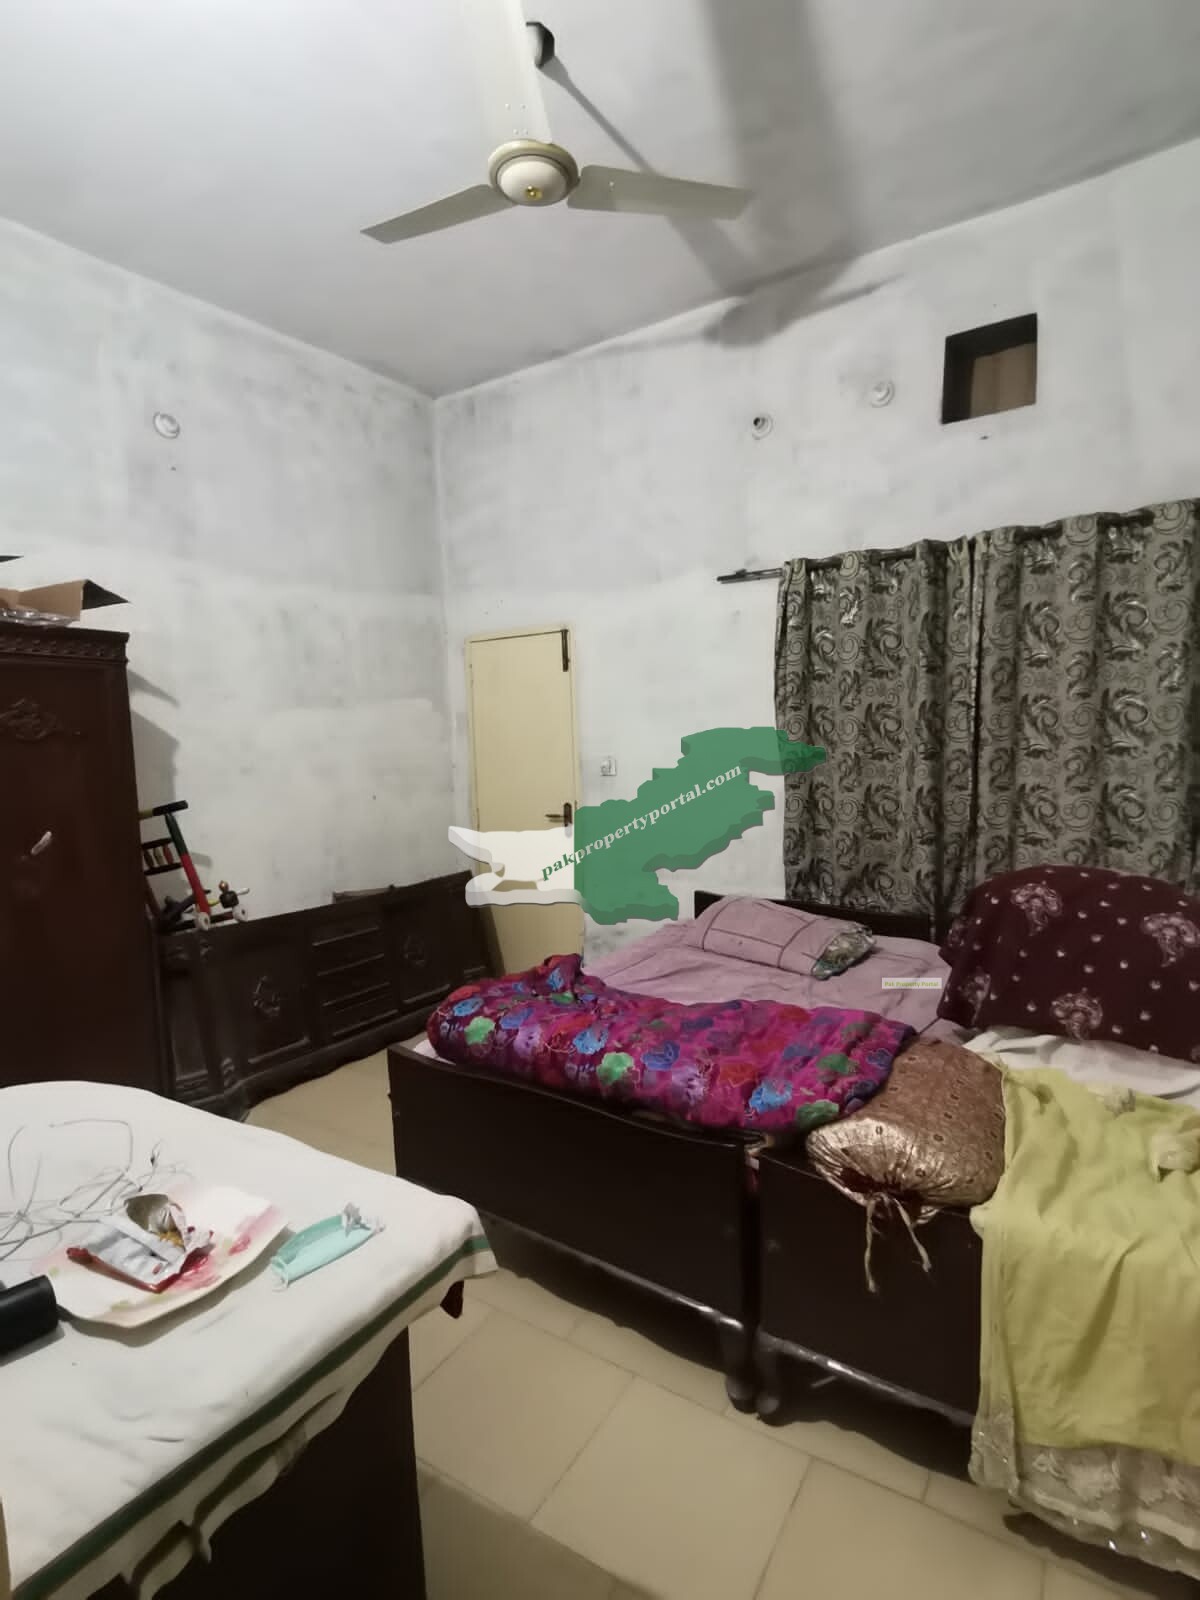 5 Marla one and a half story story house for sale in Ghang Road Street No. 1 Sheikhupura